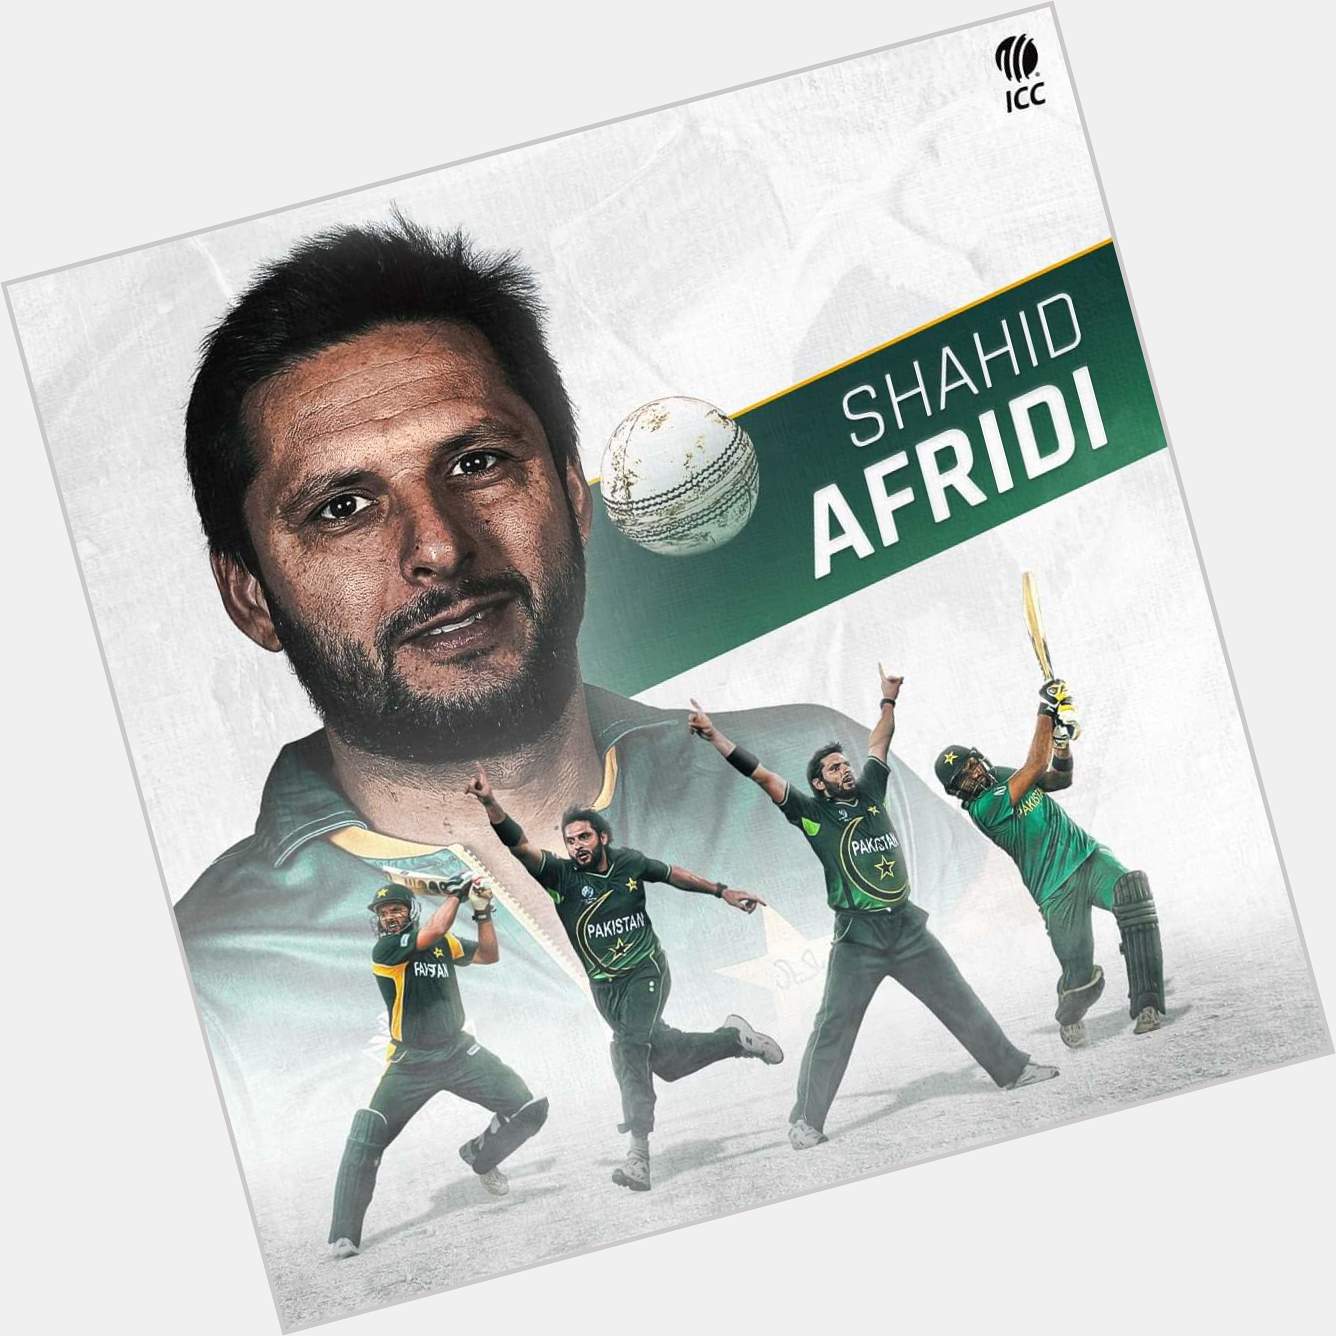     : A 37-ball century in his first ODI innings   : Most sixes in ODI history

Happy birthday, Shahid Afridi! 